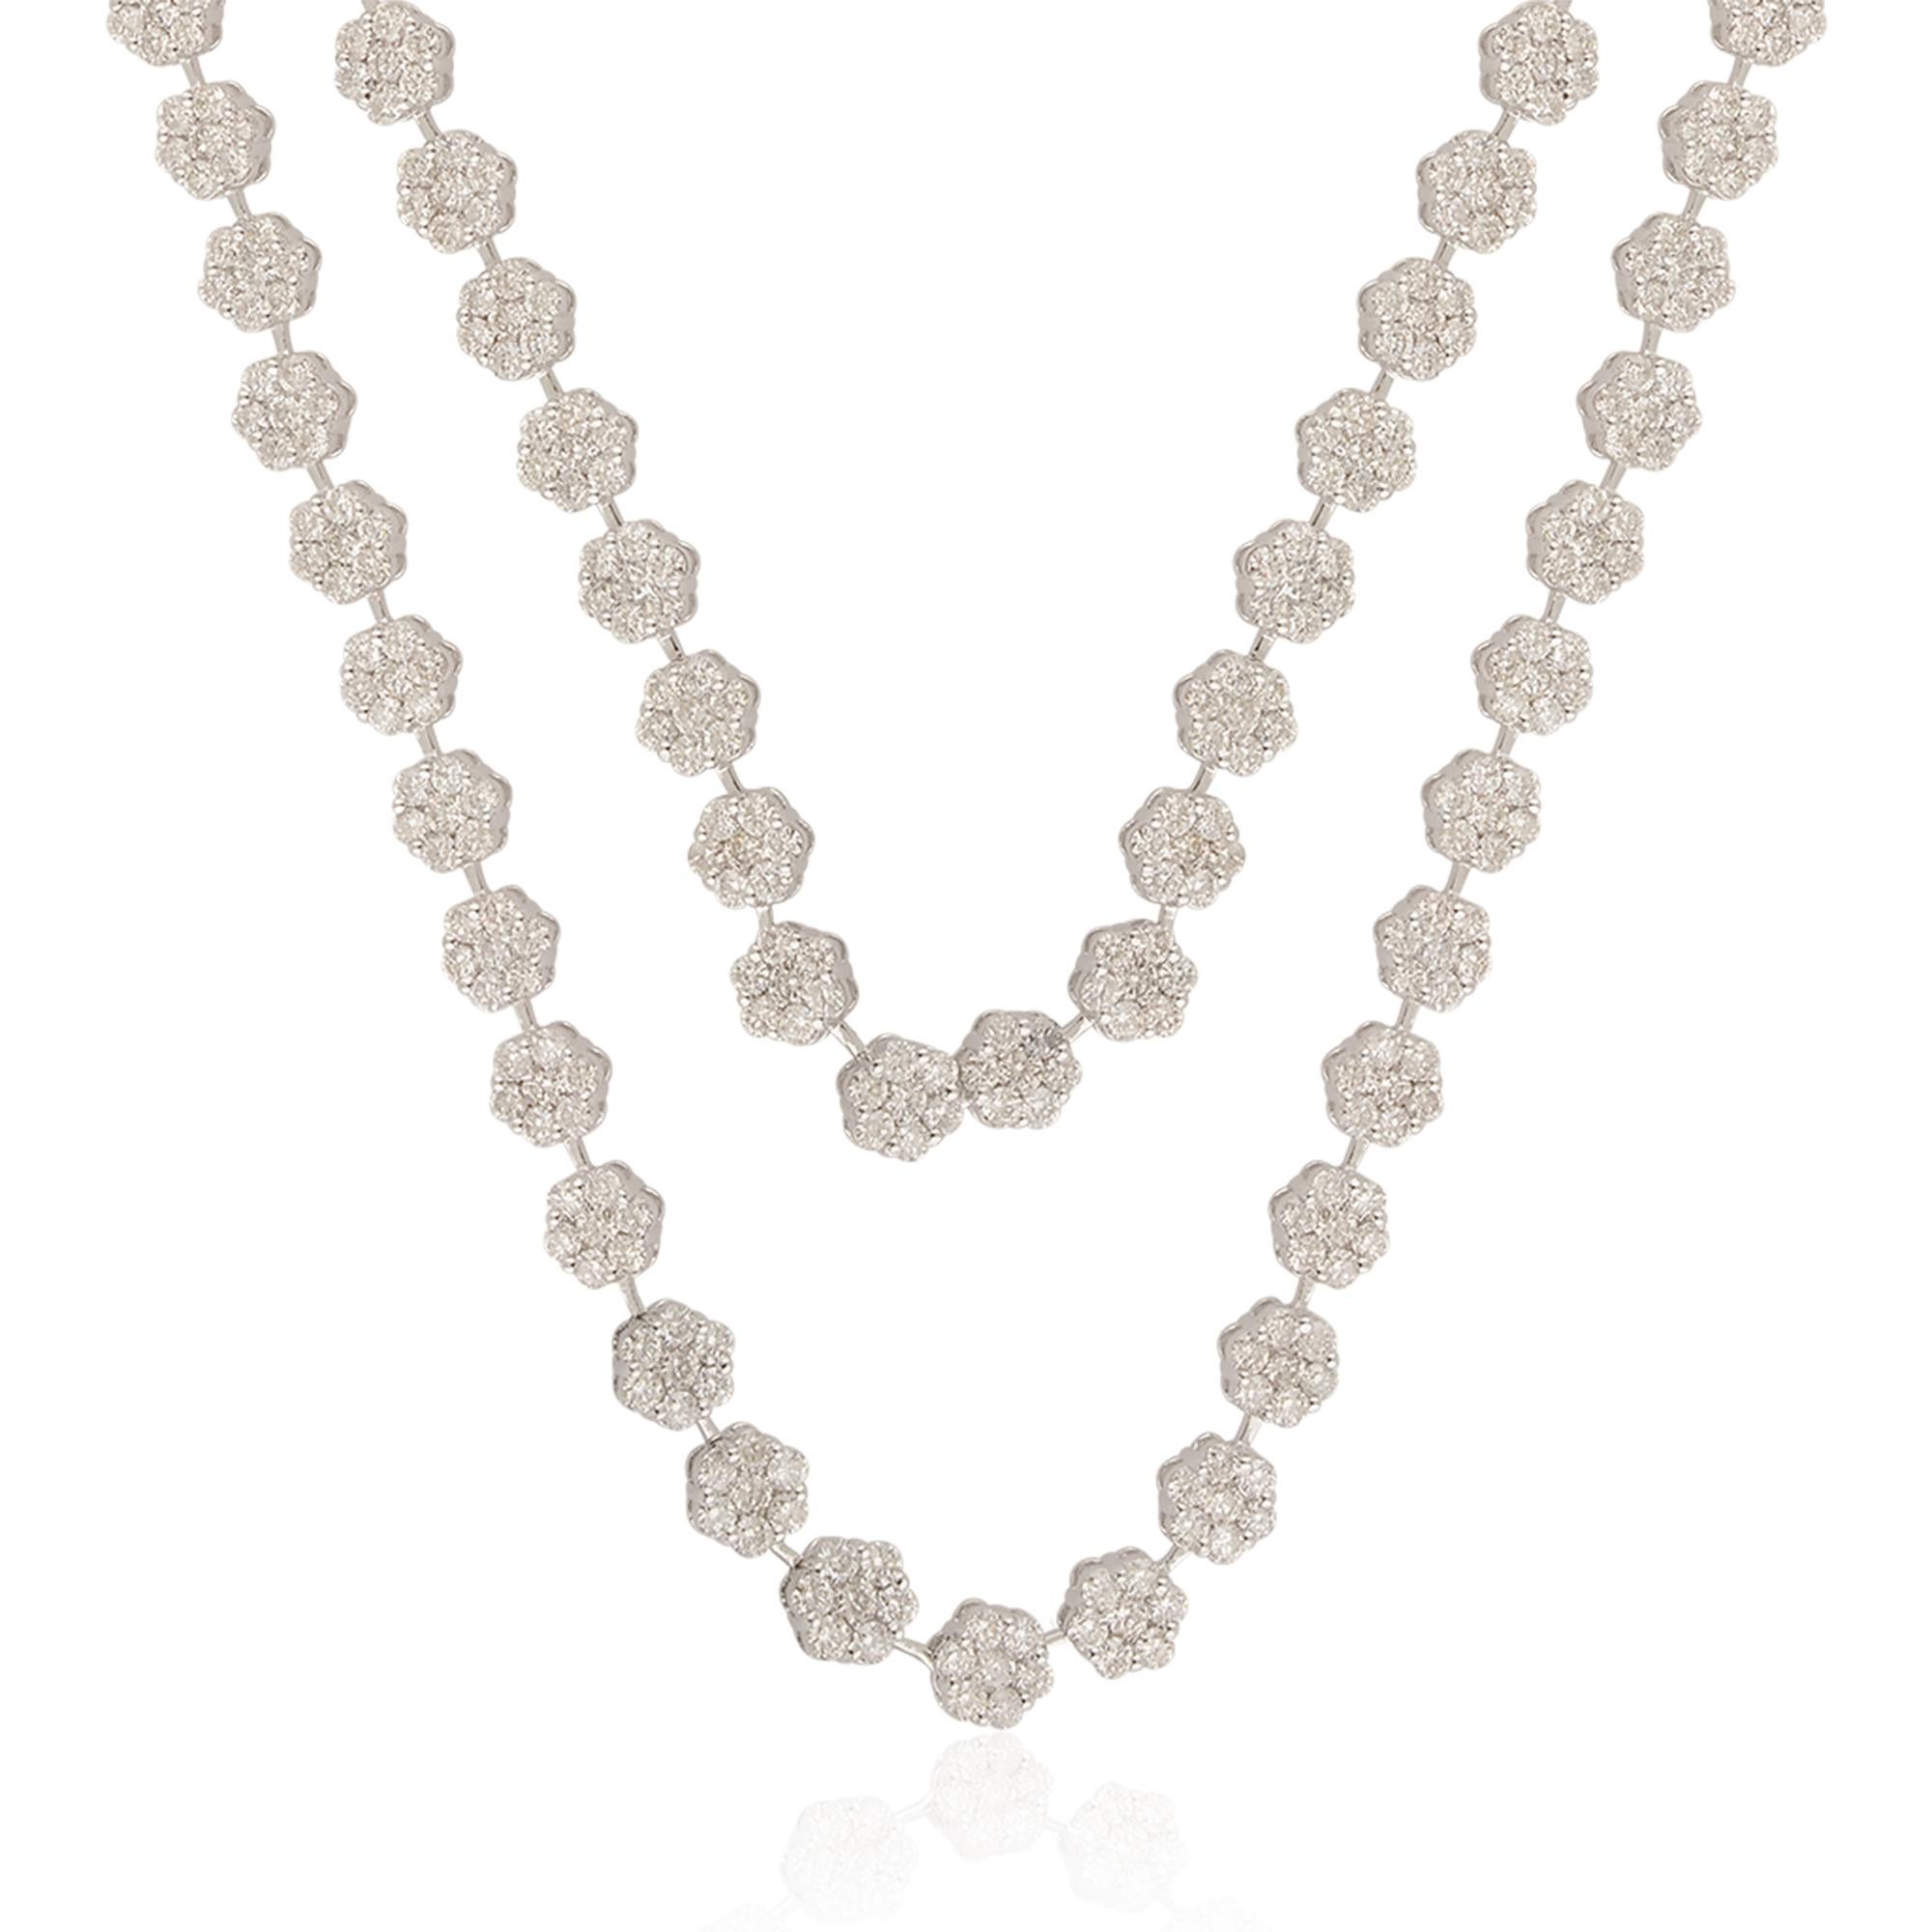 The Natural 14.20 Carat Pave Diamond Necklace in 14 karat white gold is a truly remarkable piece of jewelry, combining the beauty of diamonds, the elegance of white gold, and the expertise of handcrafted design. It is a statement piece that exudes